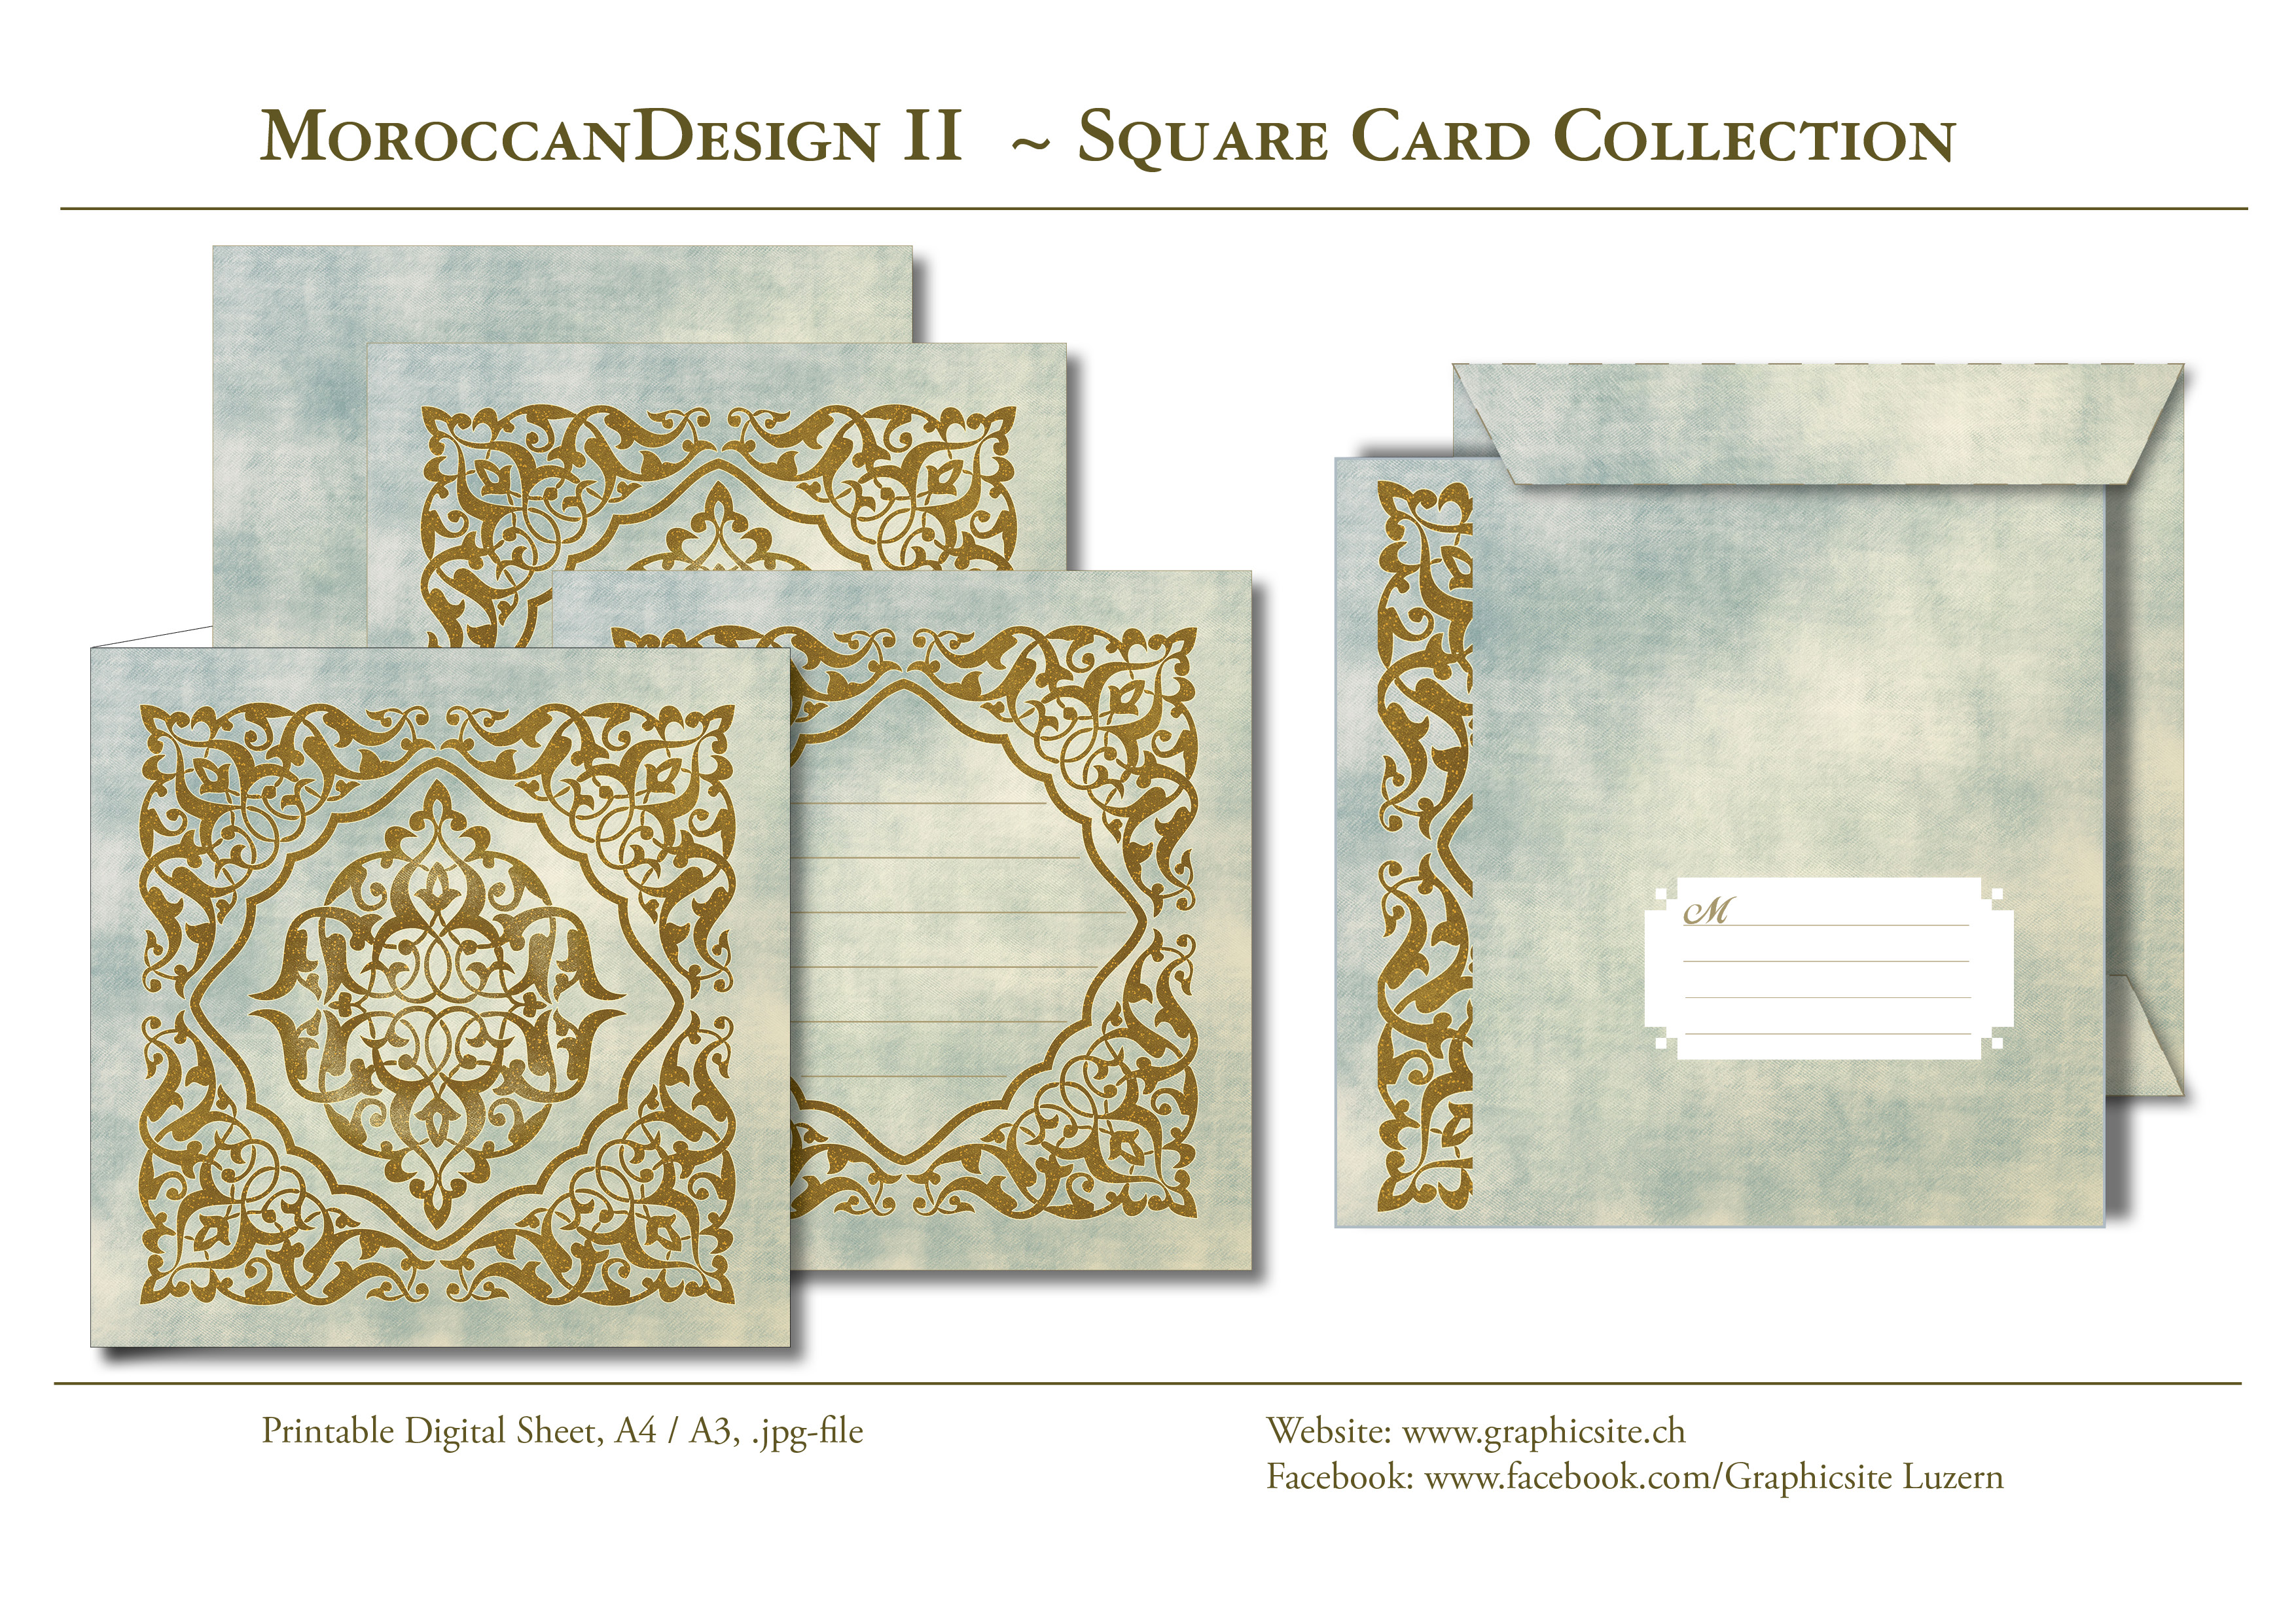 Printable Digital Sheets -  Square Card Collection - MoroccanDesign II - Oriental, Pattern, Yoga, Meditation,